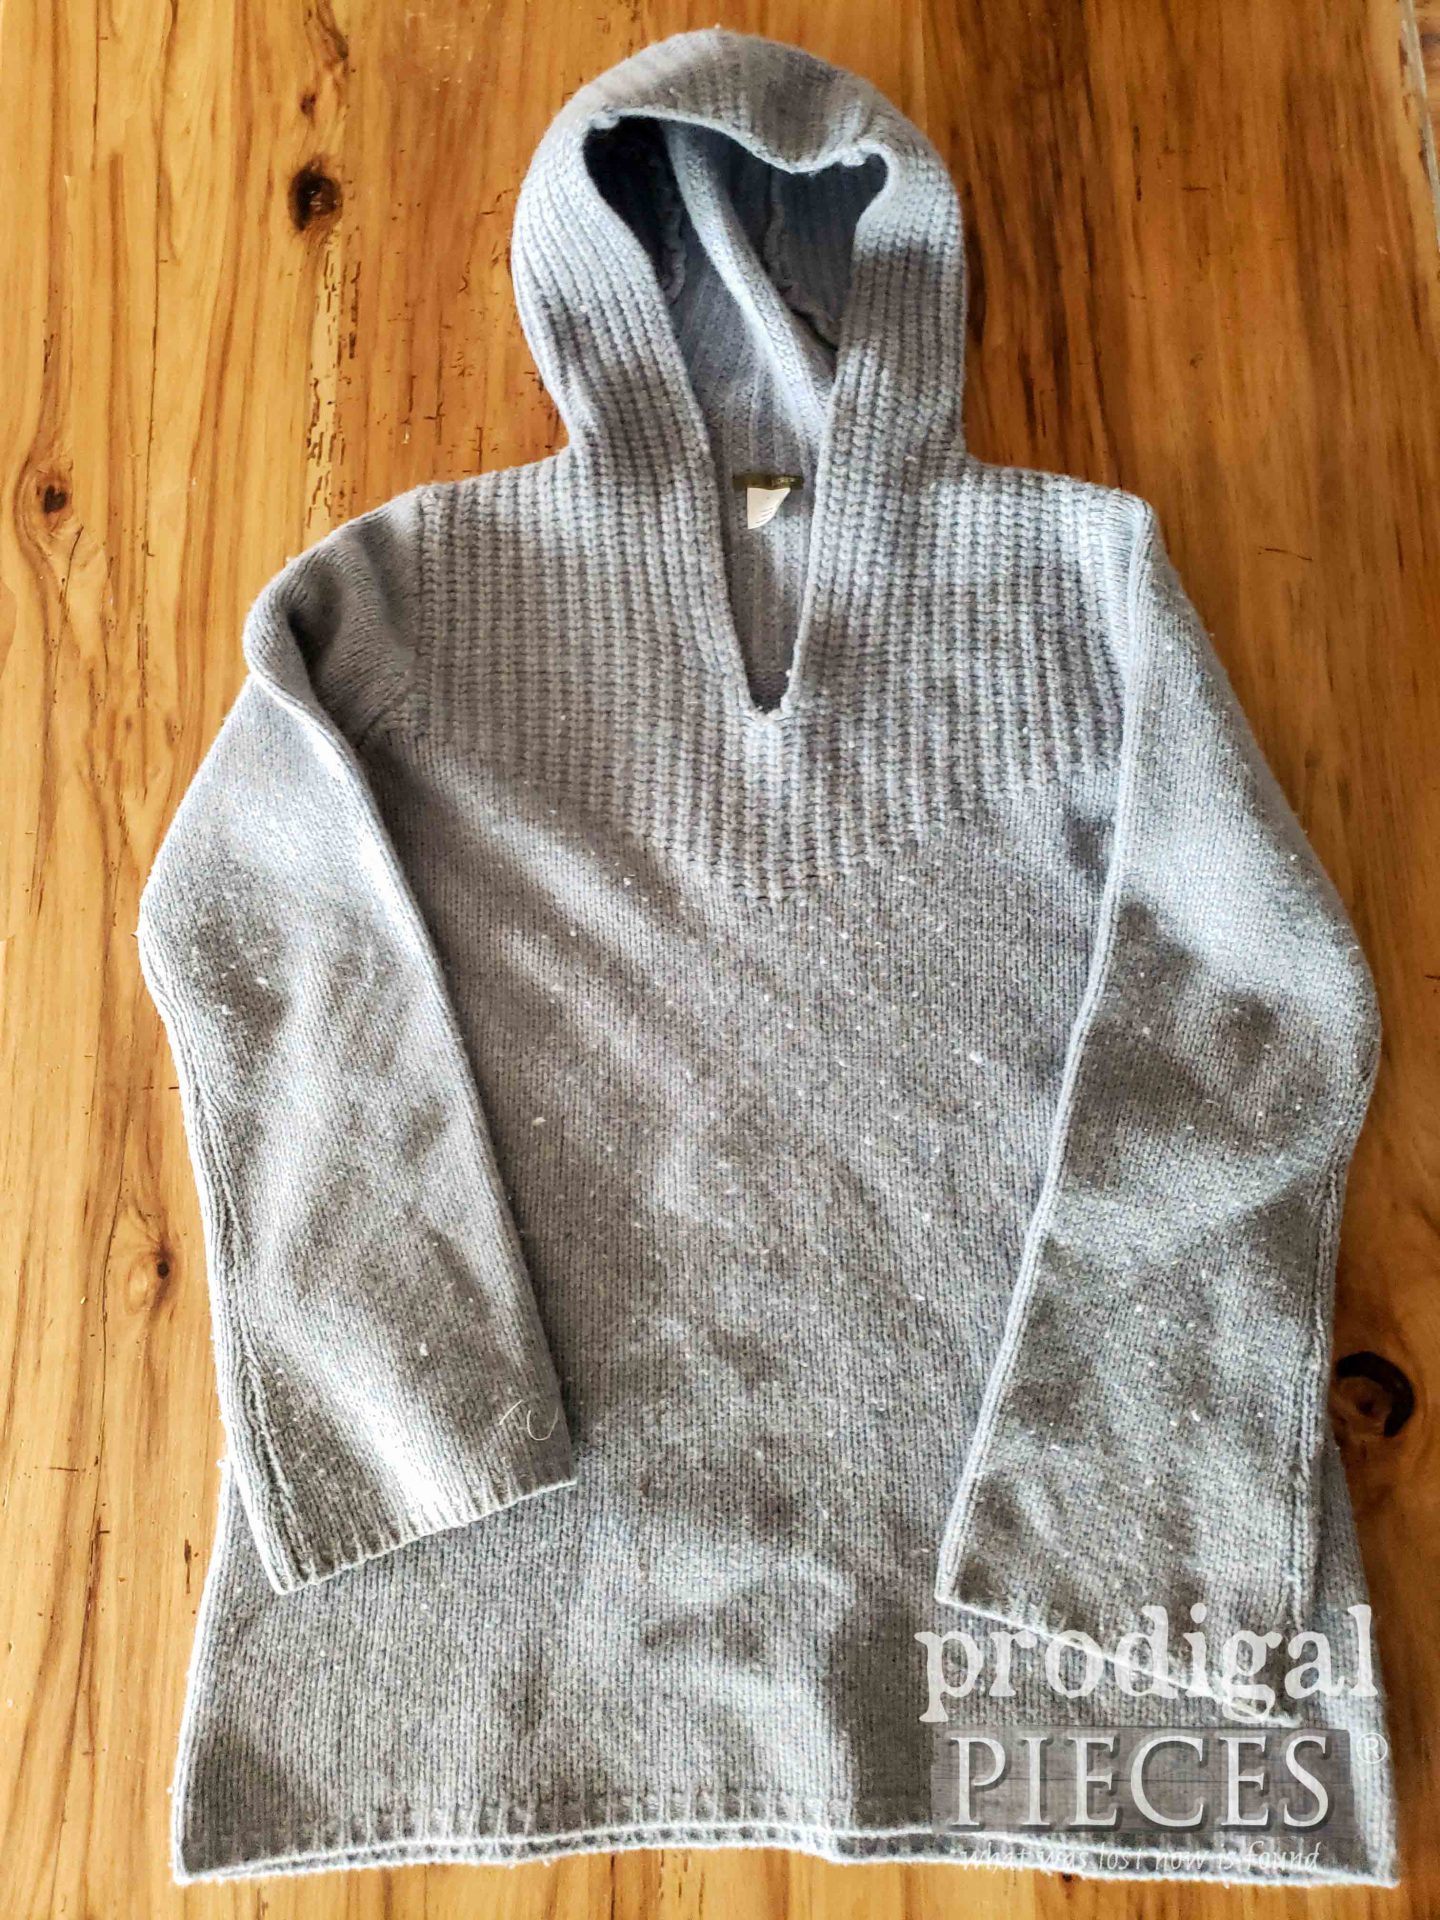 Wool Sweater Before Upcycle into Dryer Balls | prodigalpieces.com #prodigalpieces